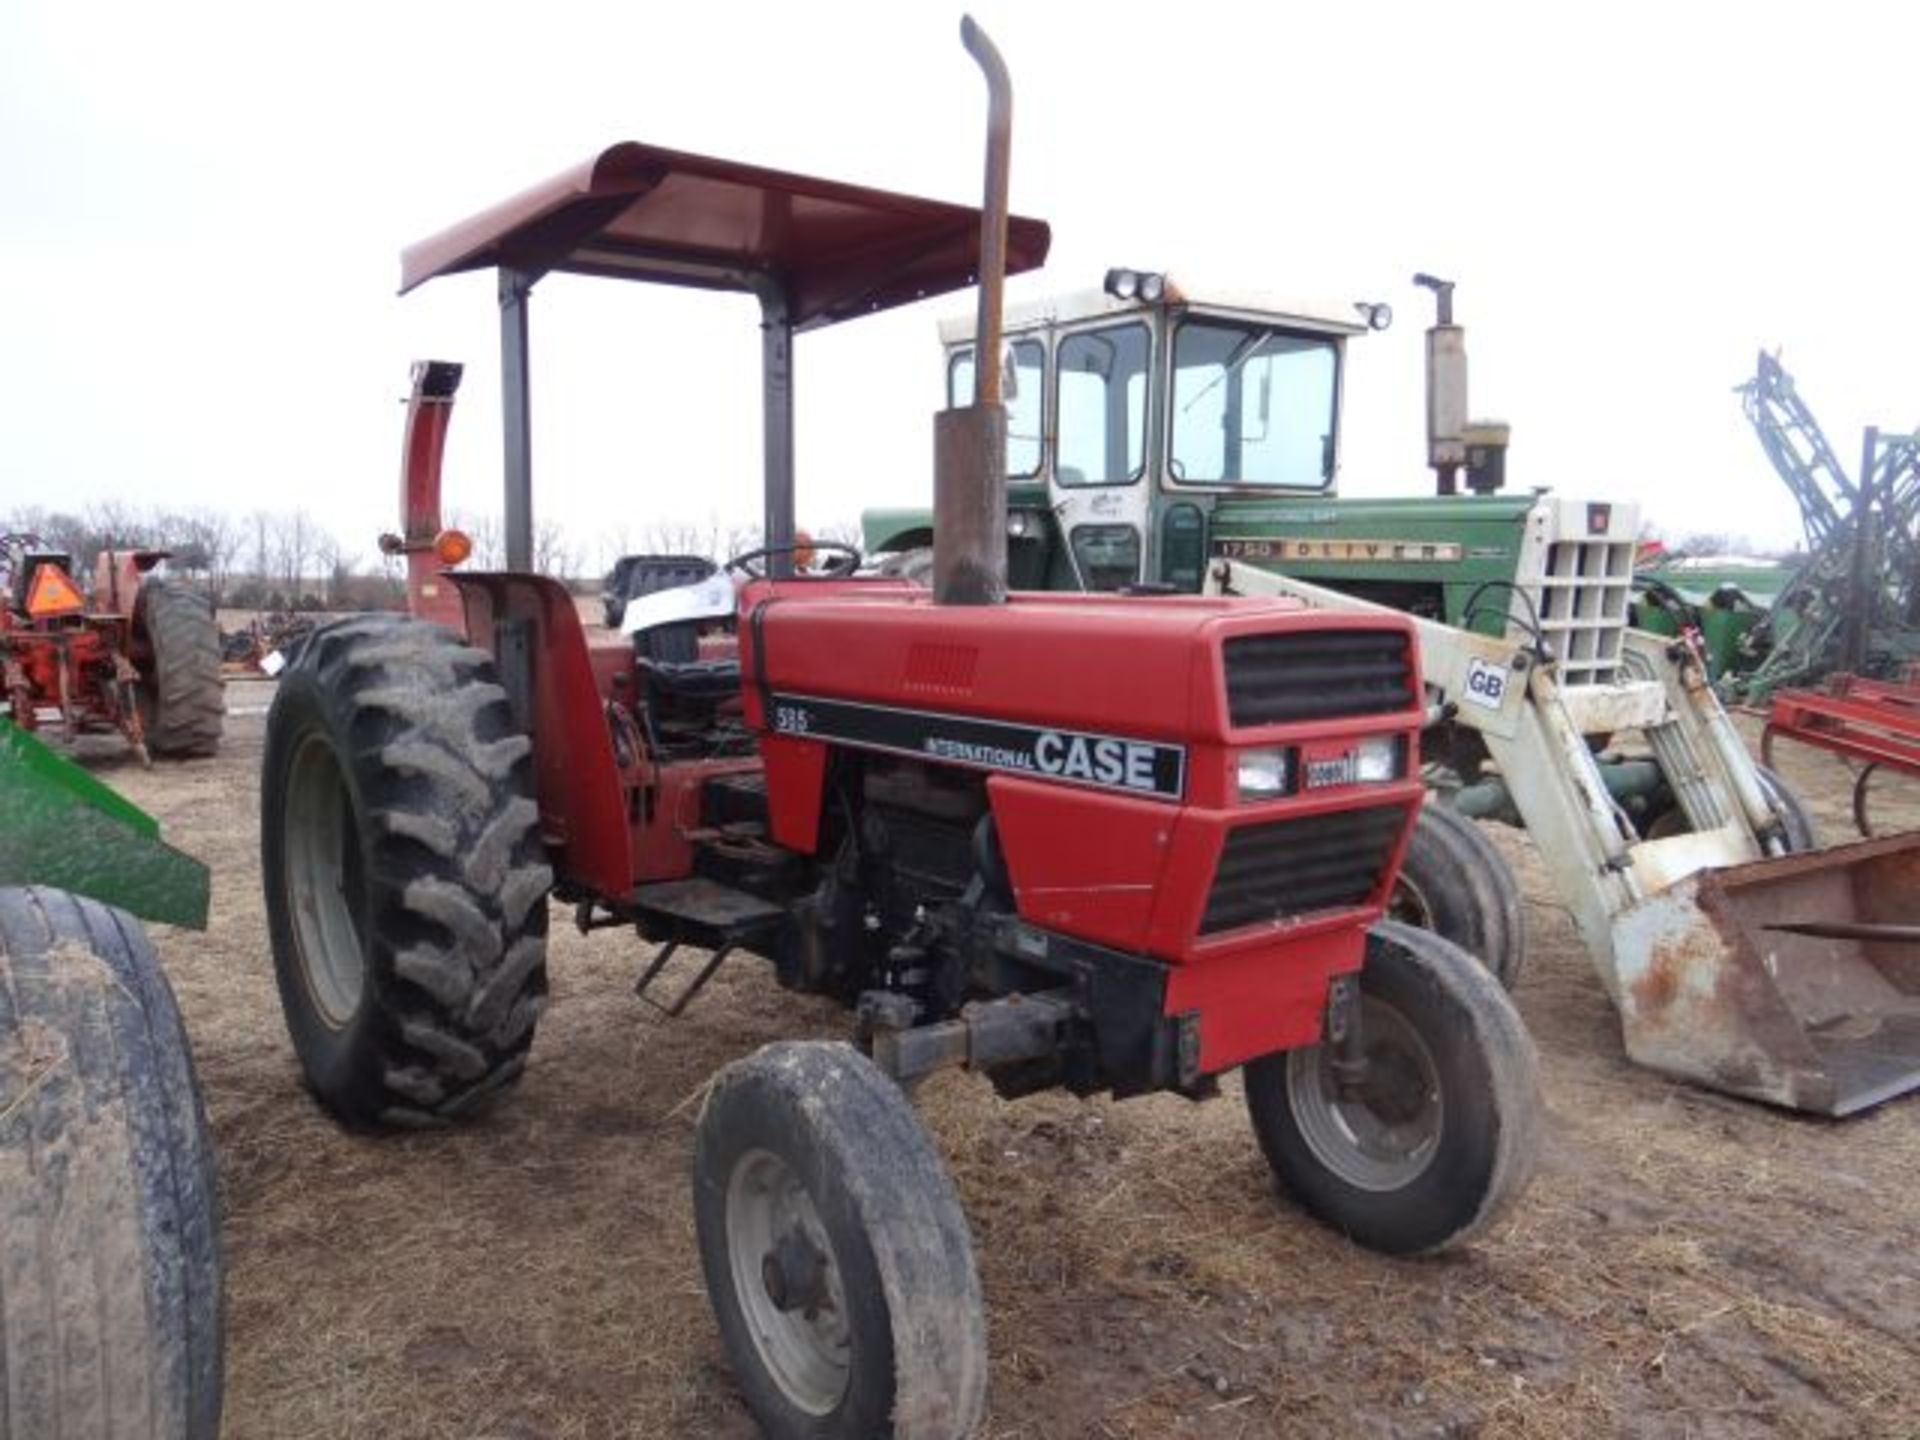 Case IH 585 Tractor, 1987 1923 hrs, Runs Great, Good Tires